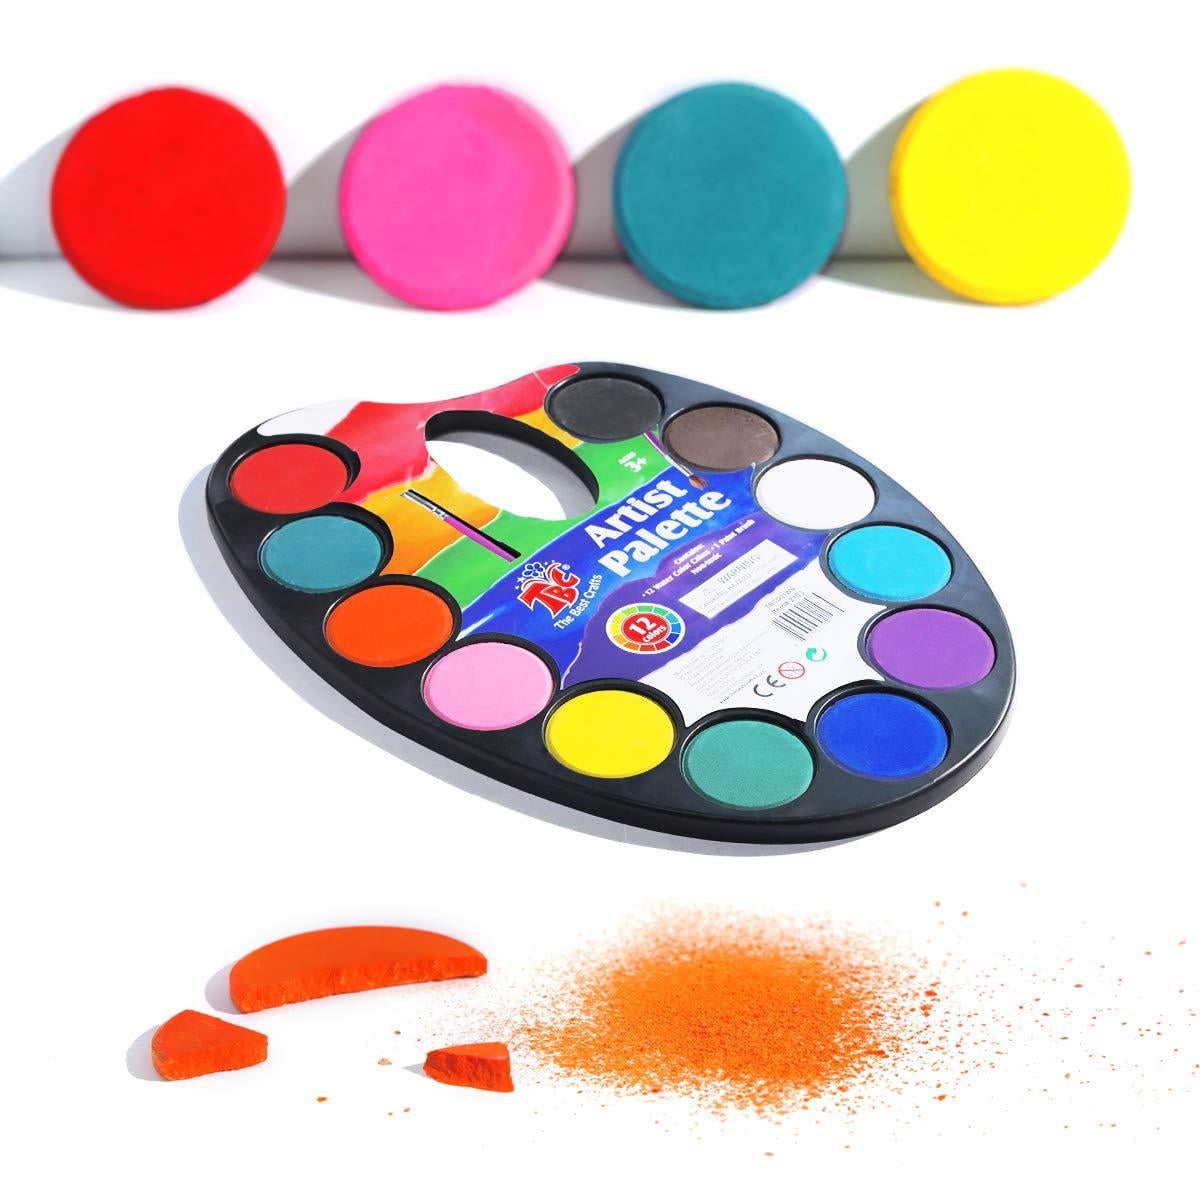 Best art supplies for 5 year olds - Cobberson + Co.